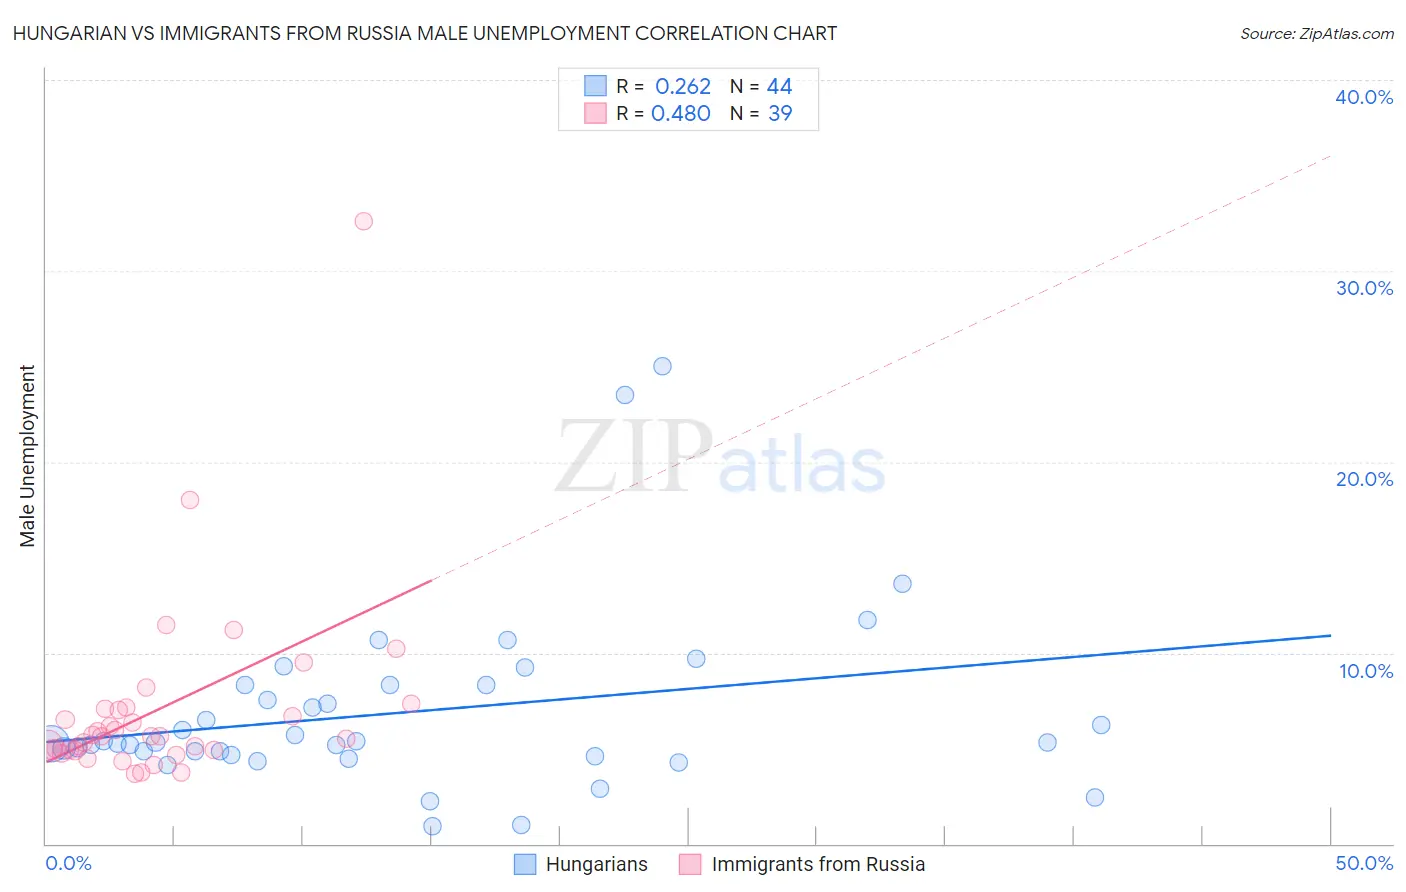 Hungarian vs Immigrants from Russia Male Unemployment